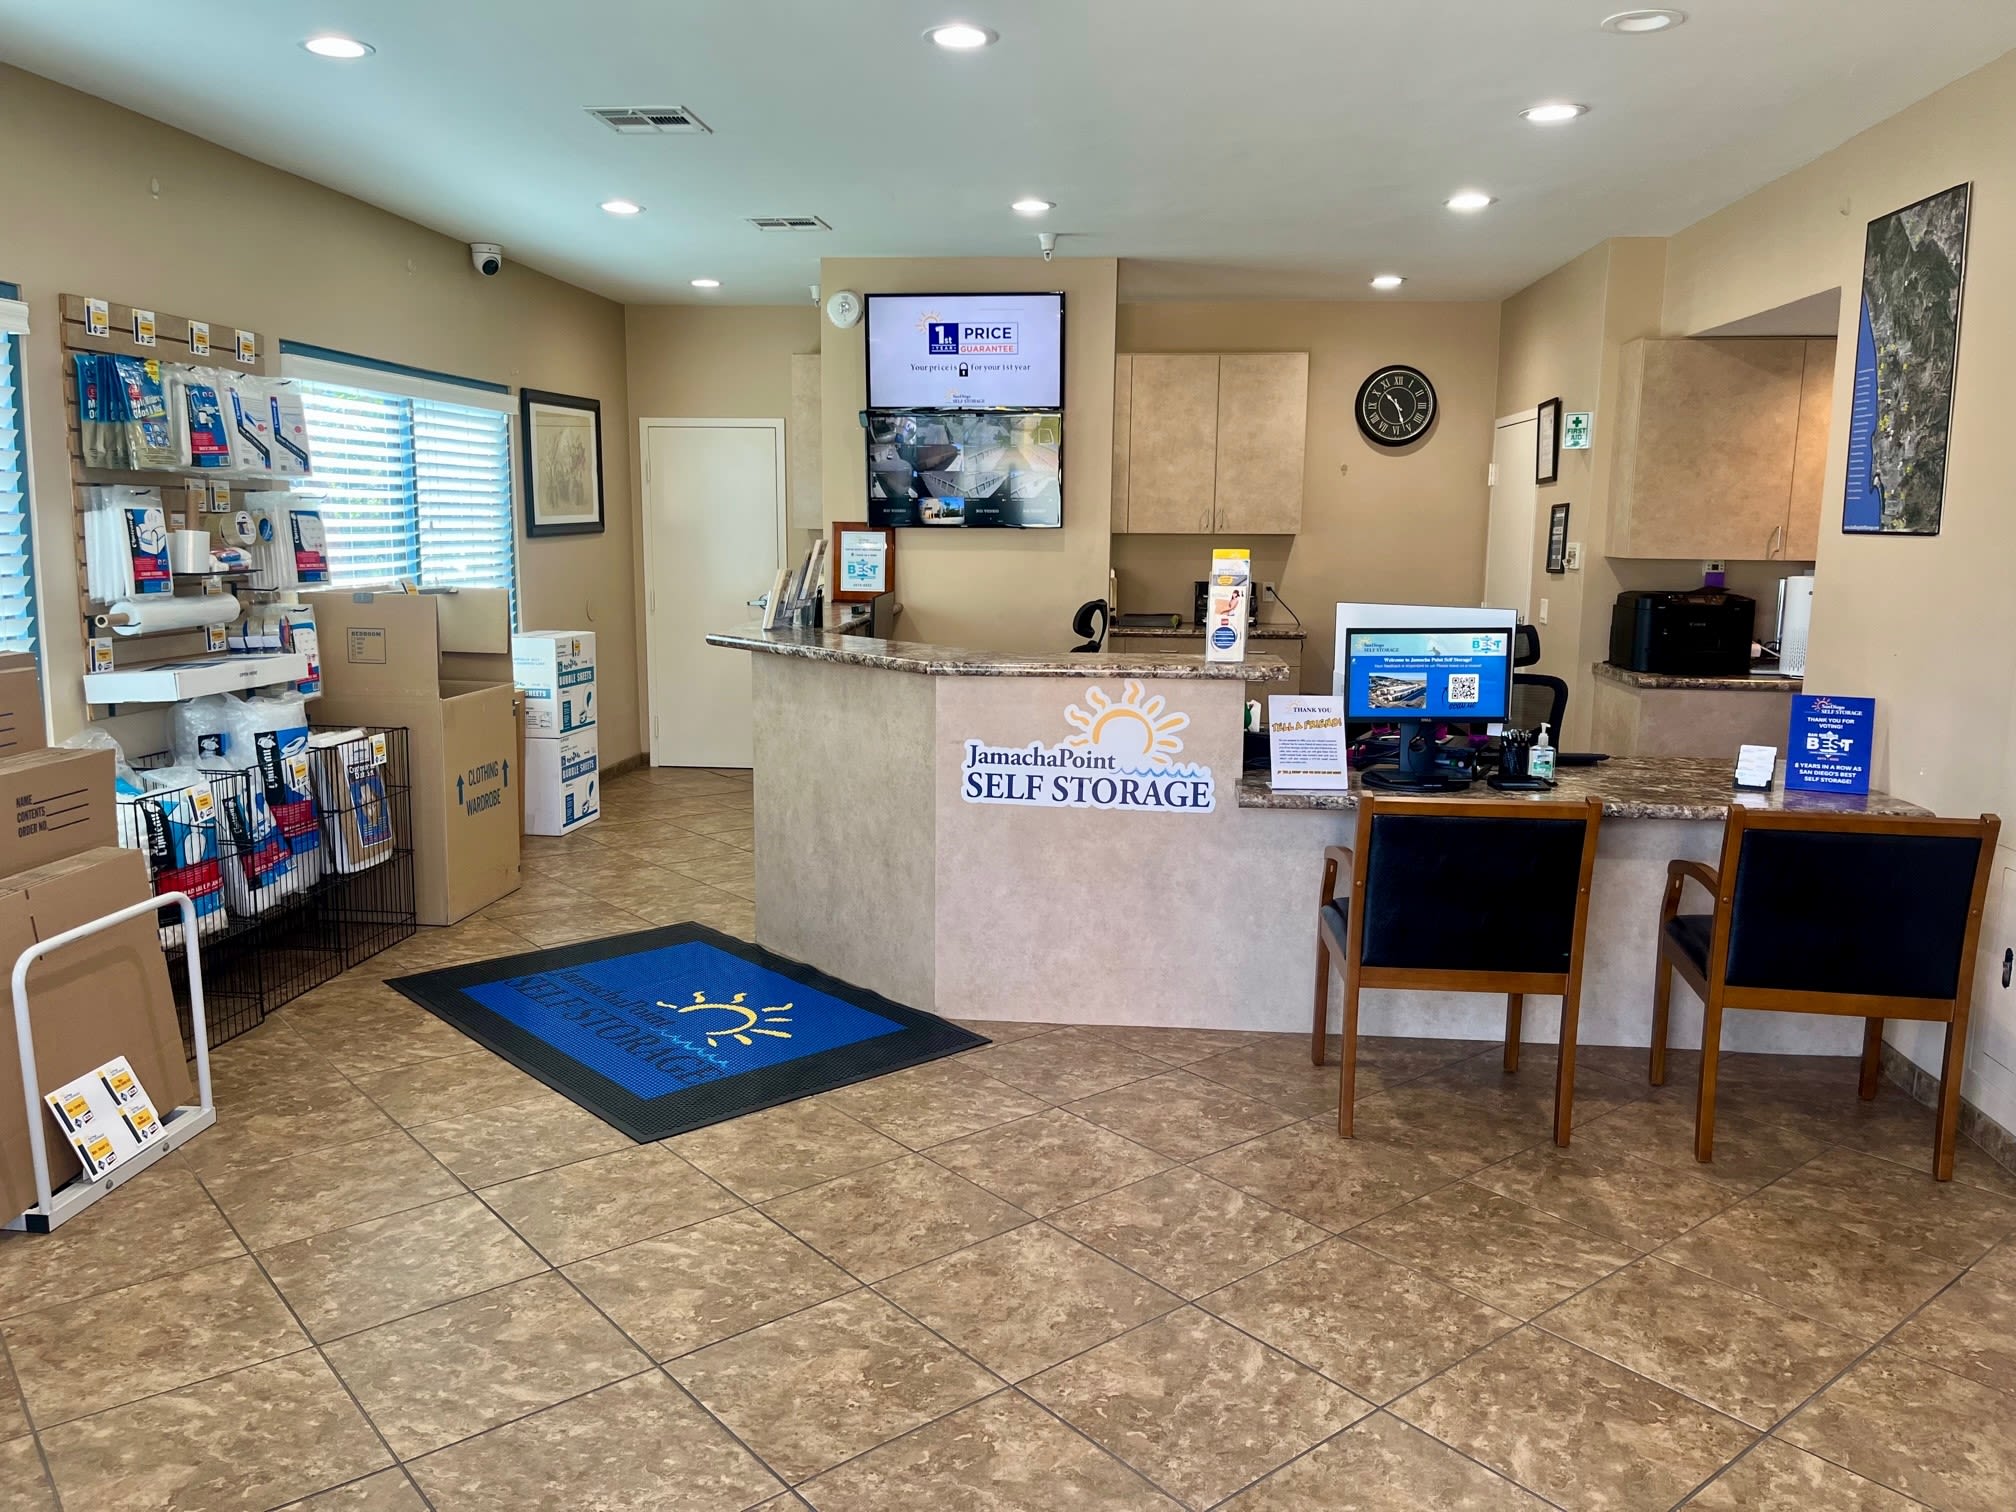 Front office at Jamacha Point Self Storage in Spring Valley, CA